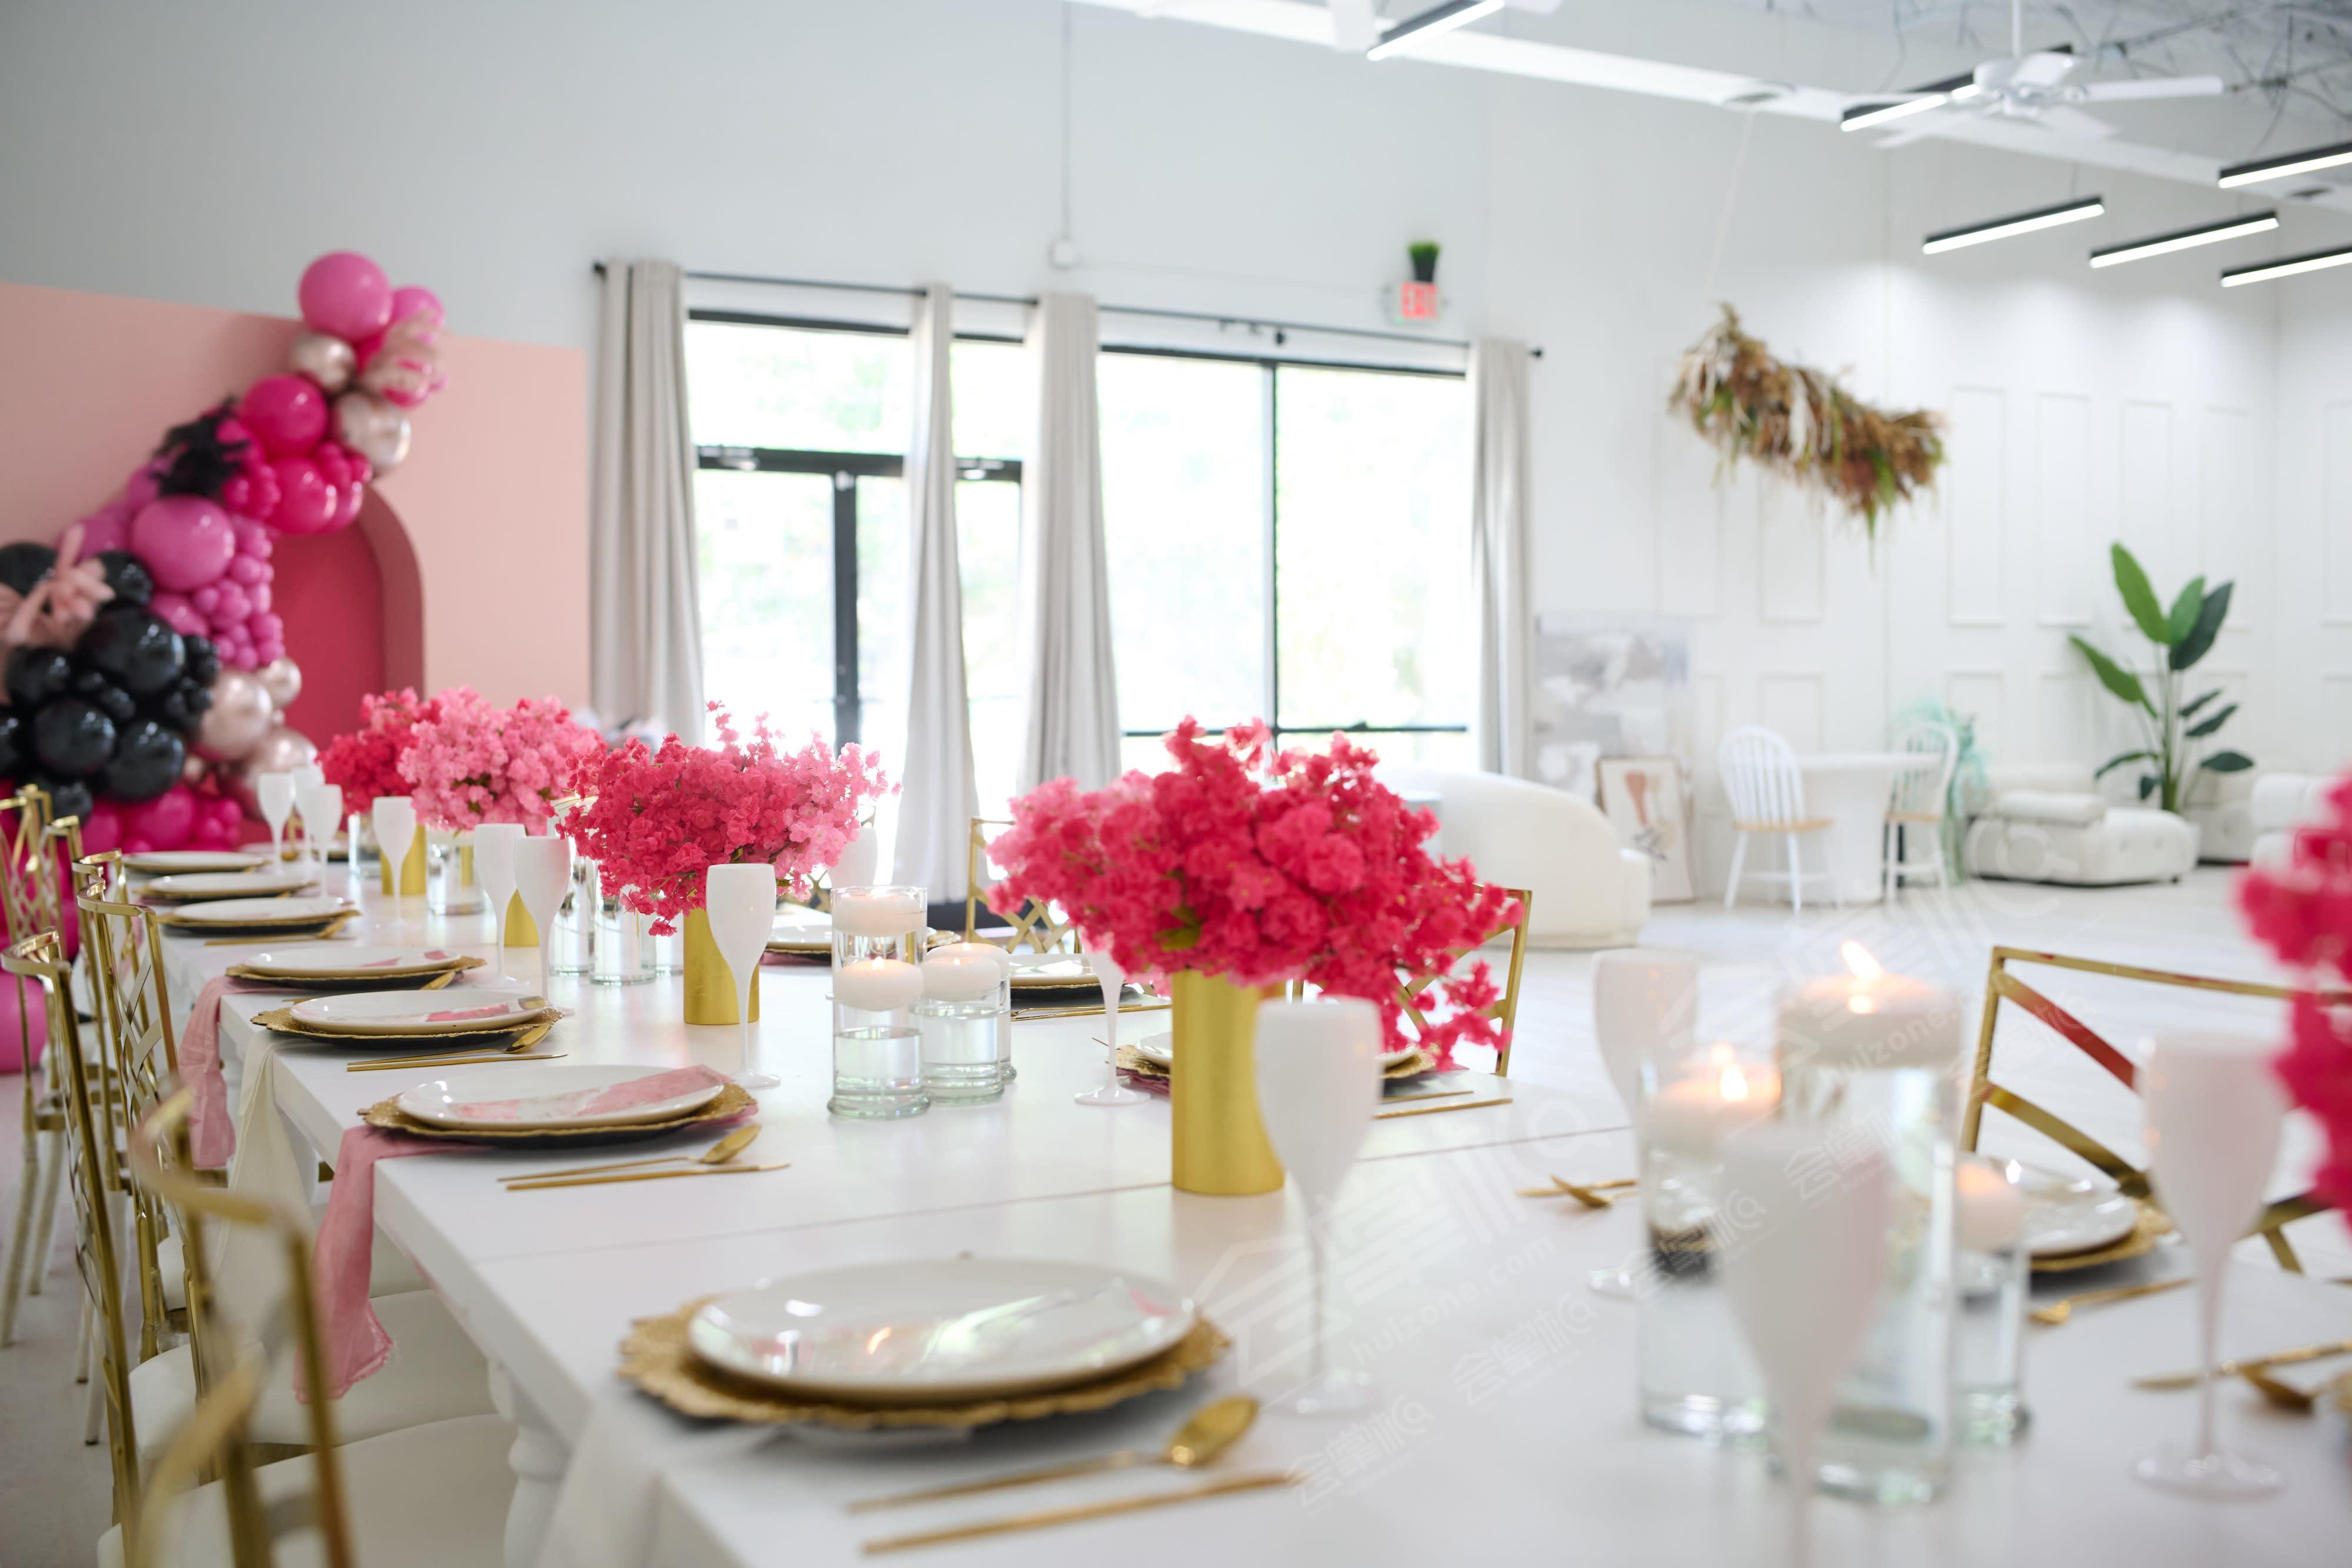 Houston Downtown Elegant Chic Modern-Style Event Space with Luxe Aesthetics for Showers, Parties, & more!